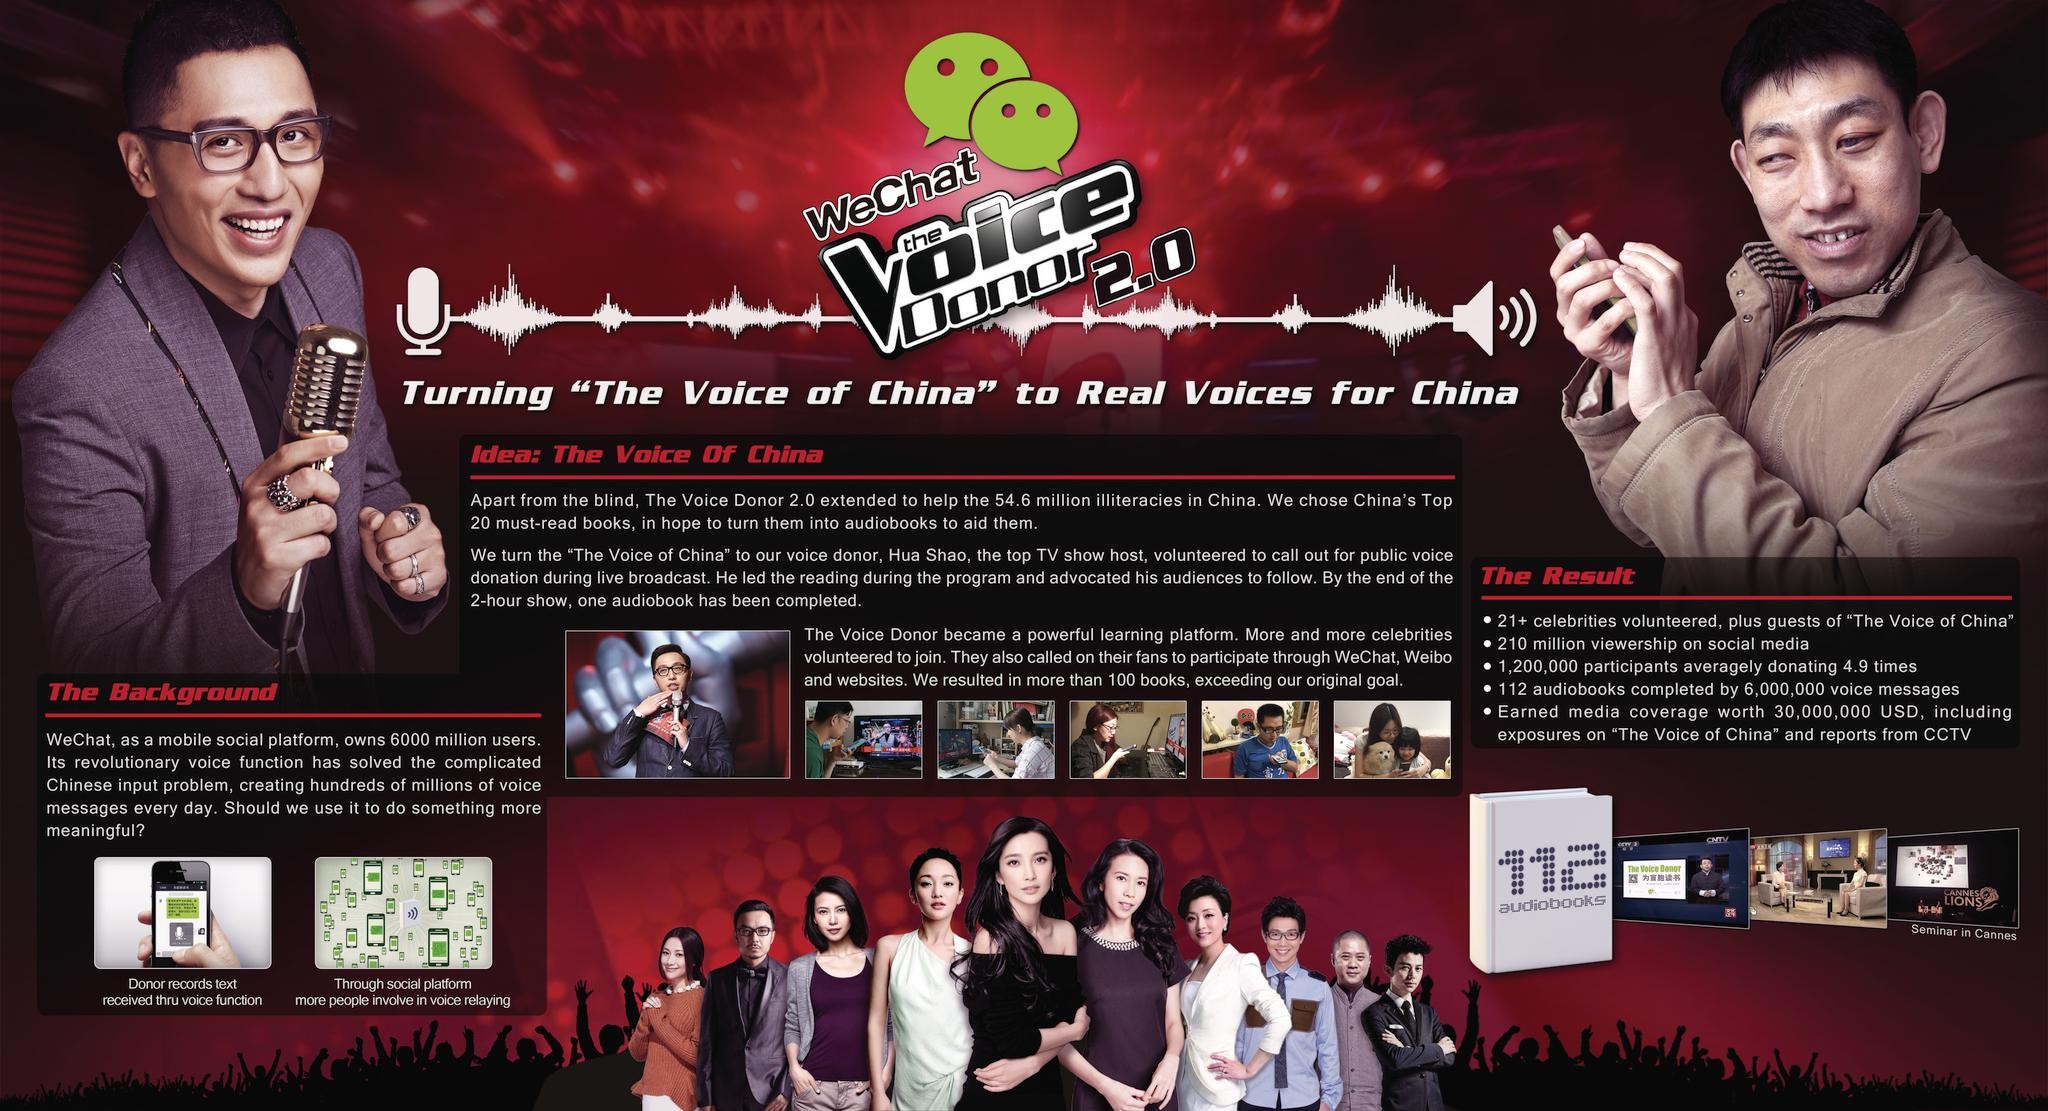 THE VOICE DONOR 2.0